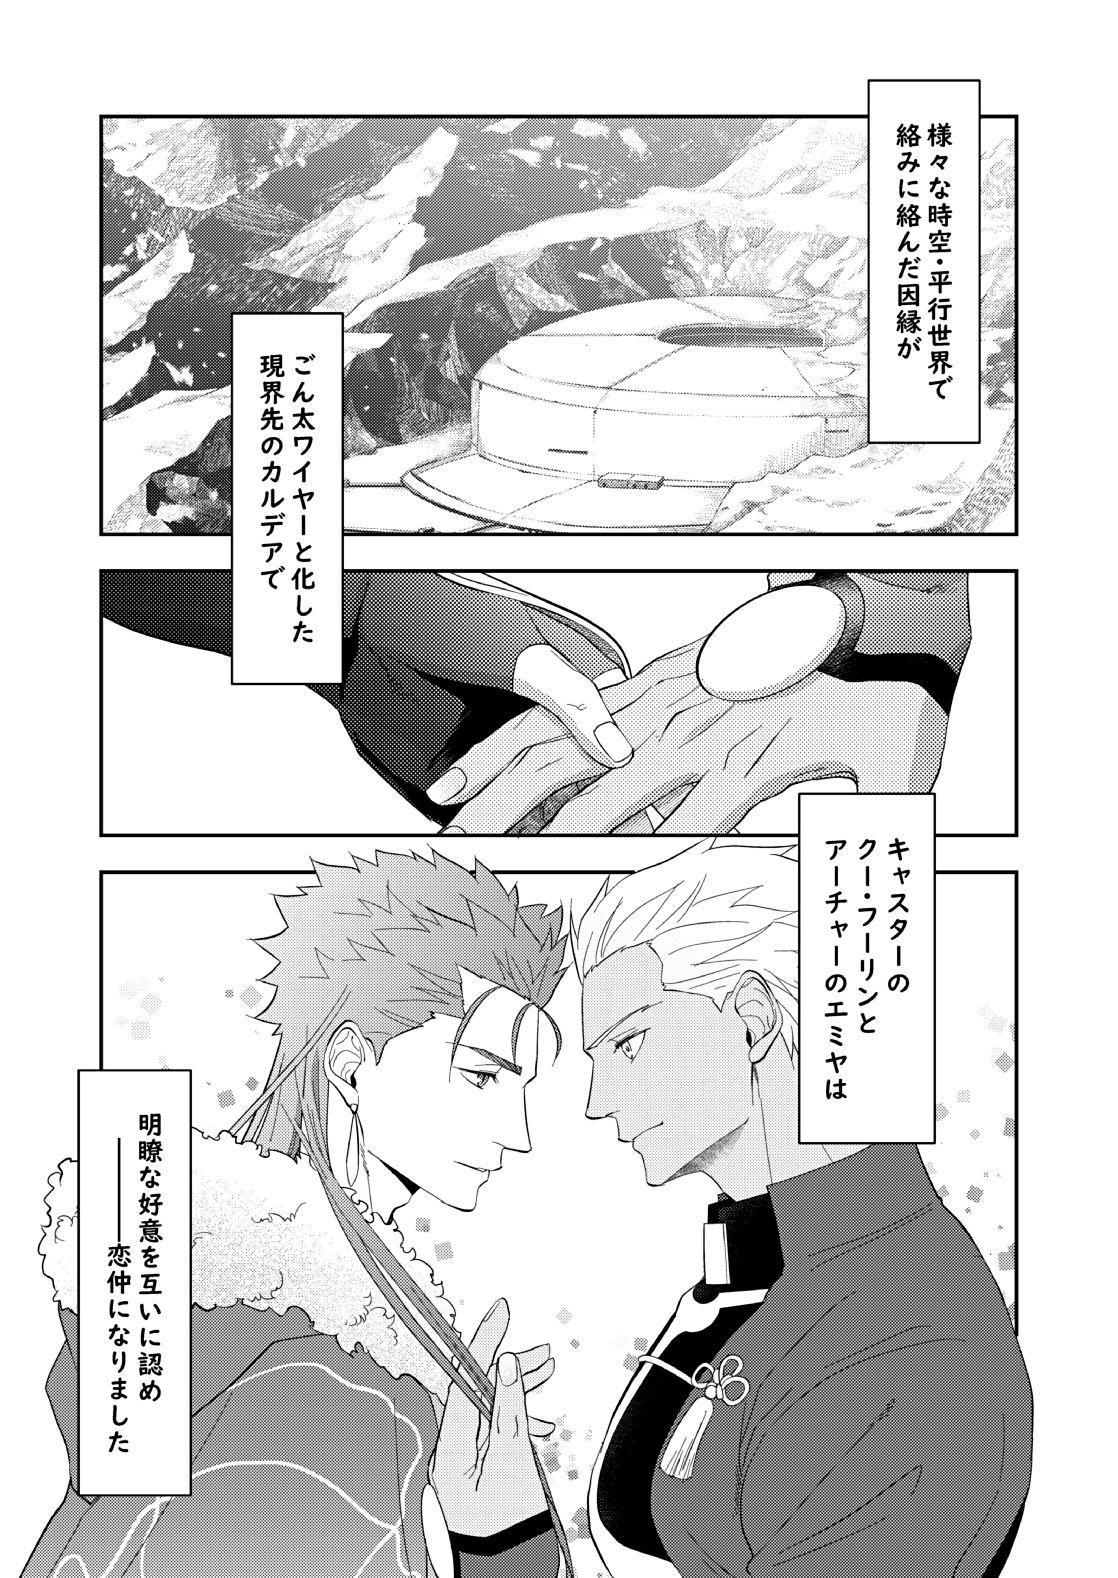 Hung deification - Fate grand order Muscle - Page 3